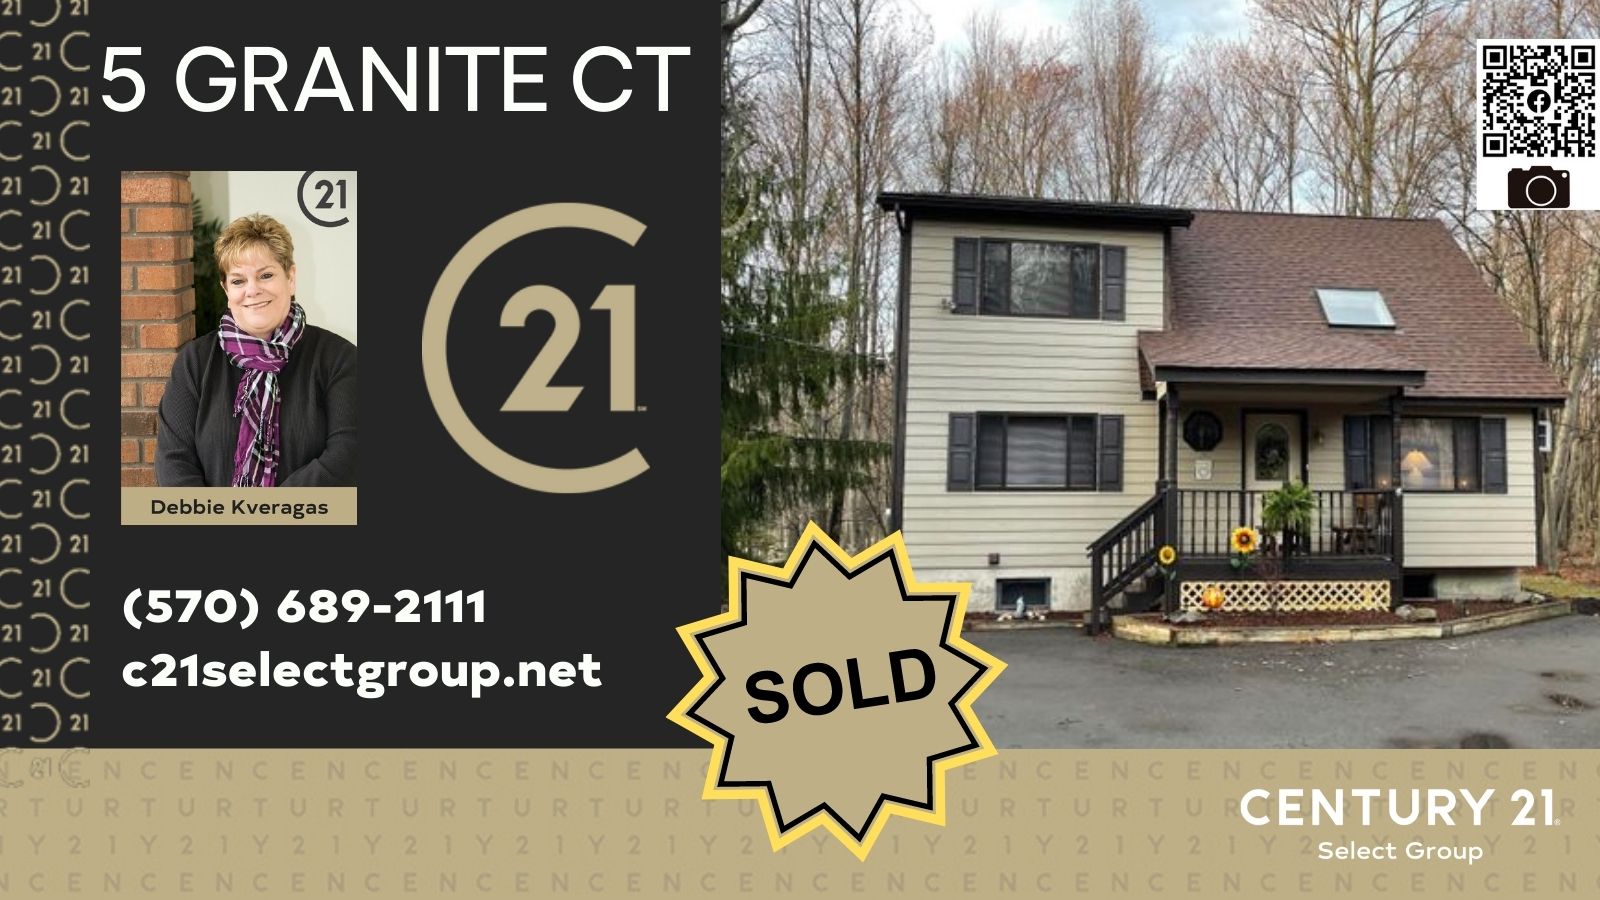 SOLD! 5 Granite Court: The Hideout